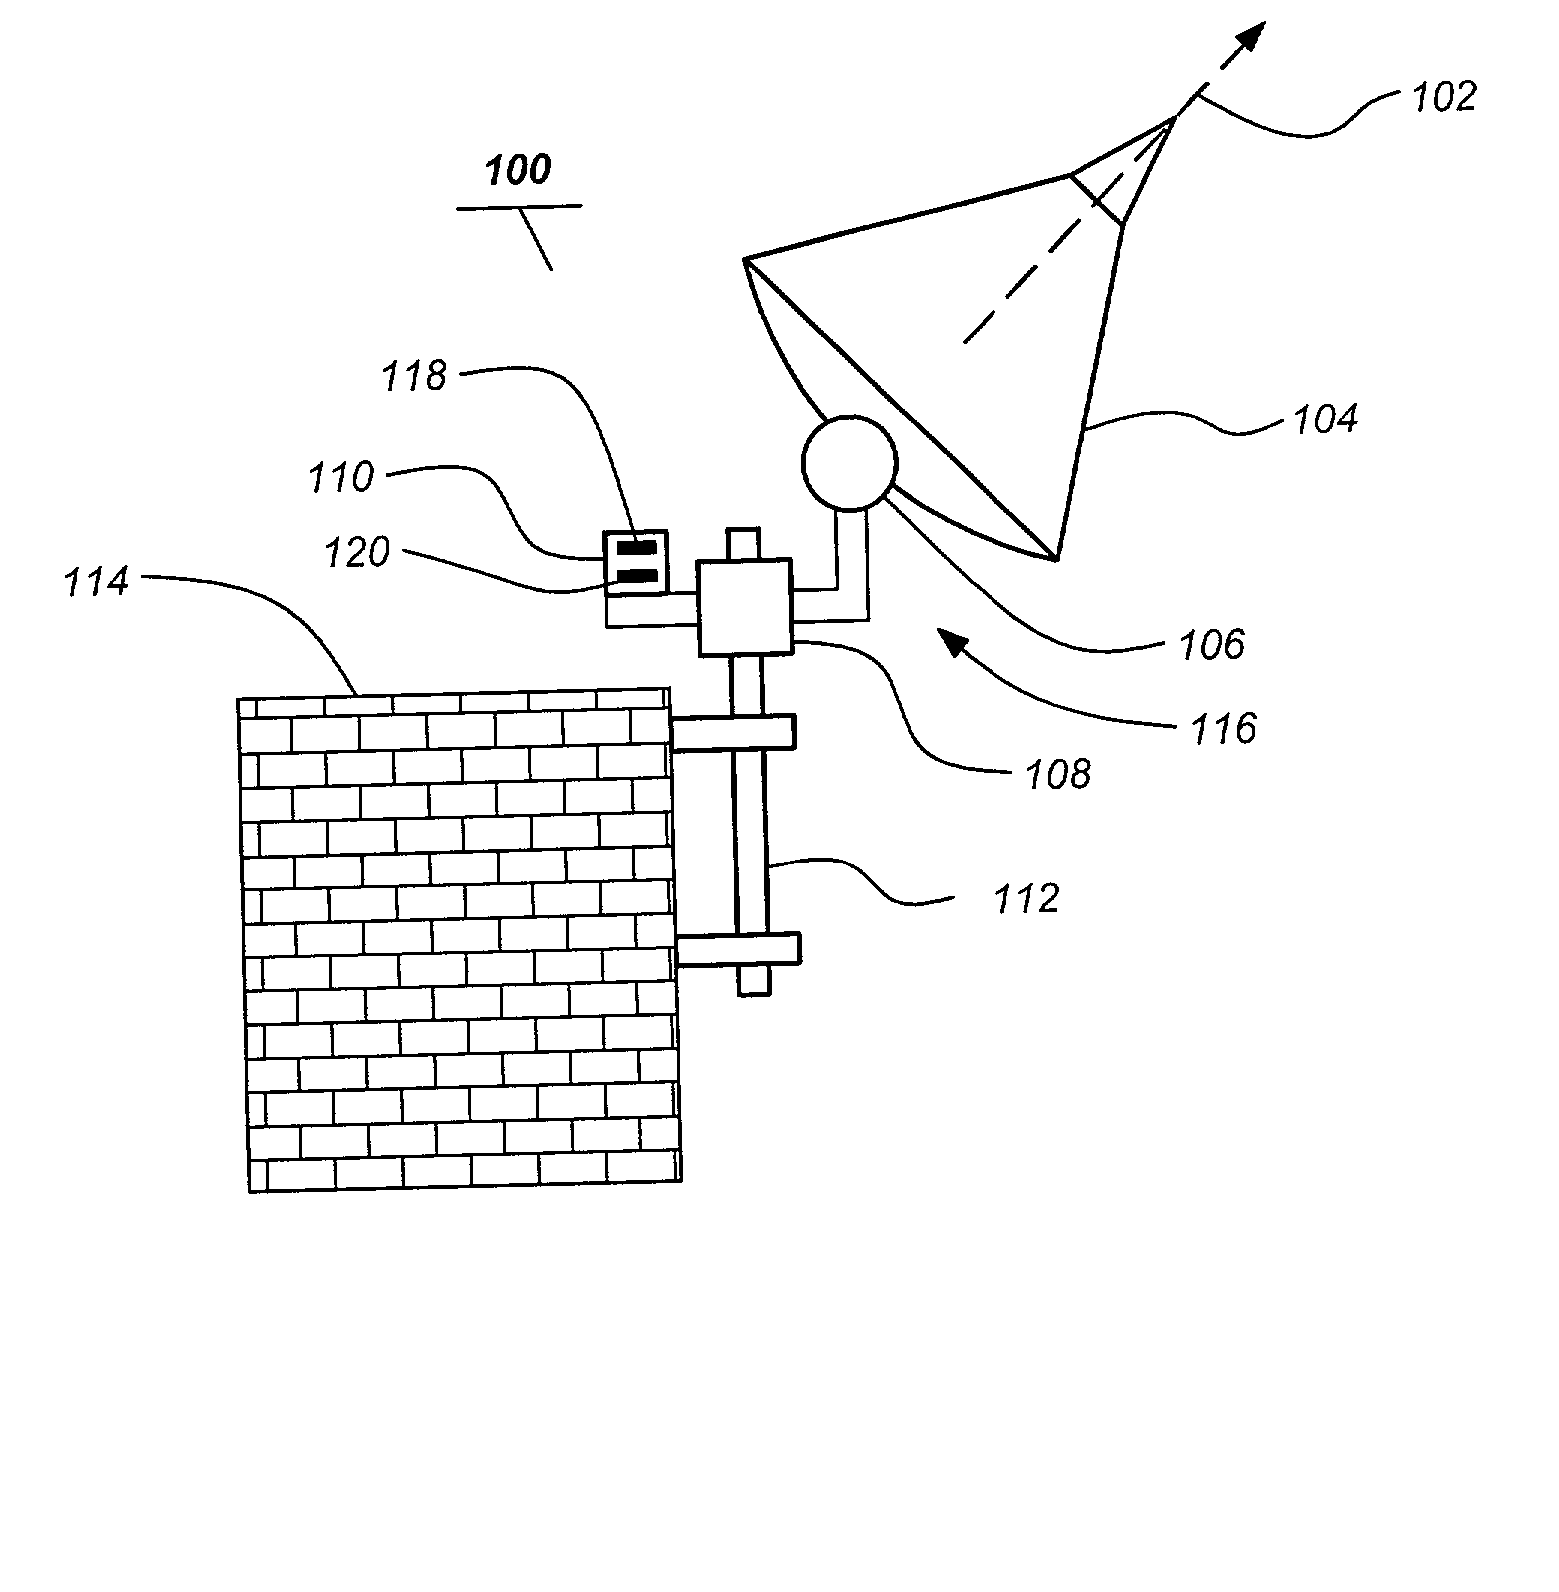 Instrument alignment devices and methods